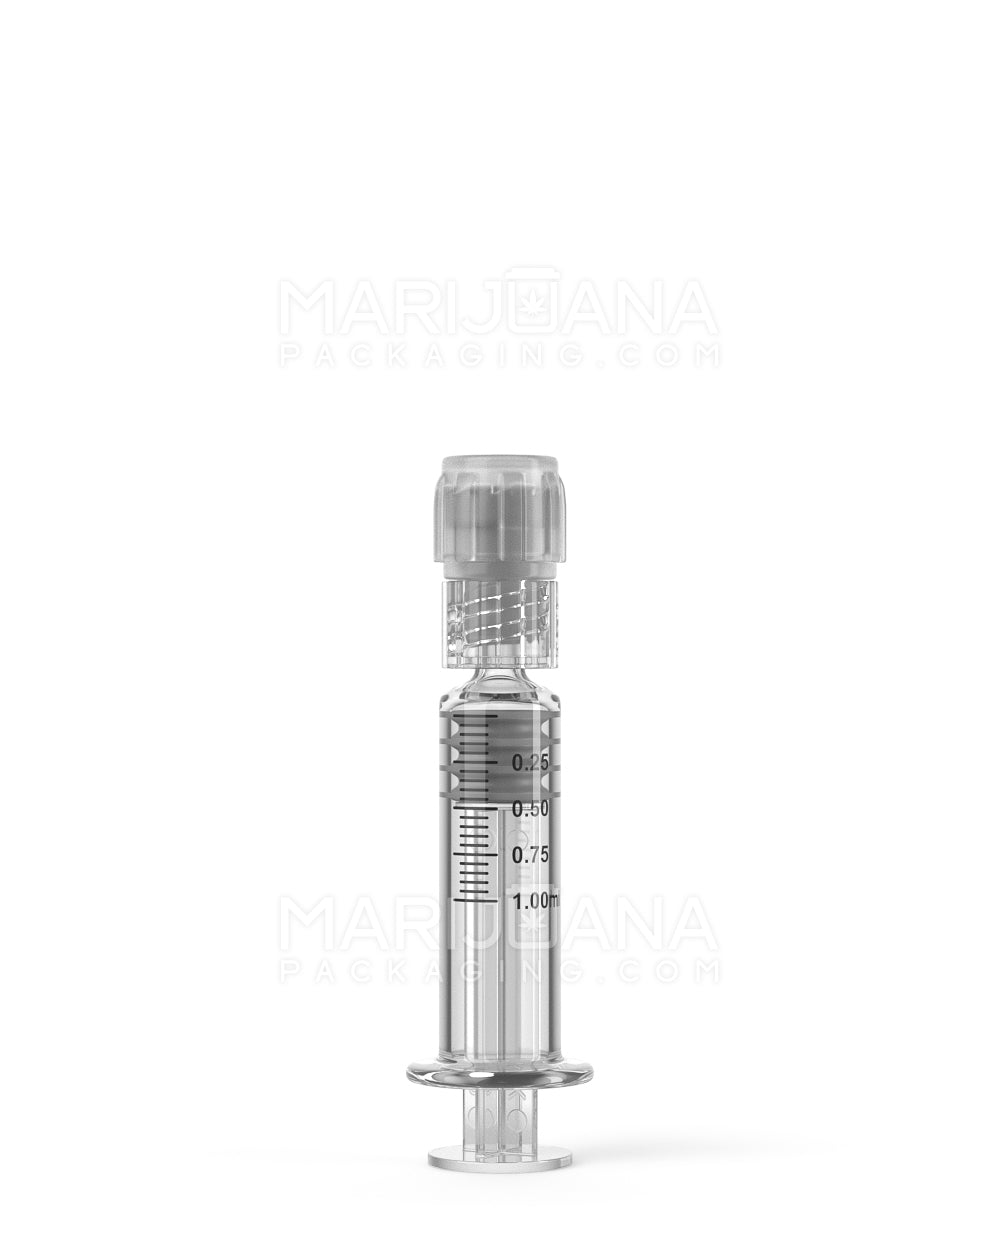 Child Resistant & Luer Lock | Glass Dab Applicator Syringes | 1mL - 0.25mL Increments - 100 Count - 8